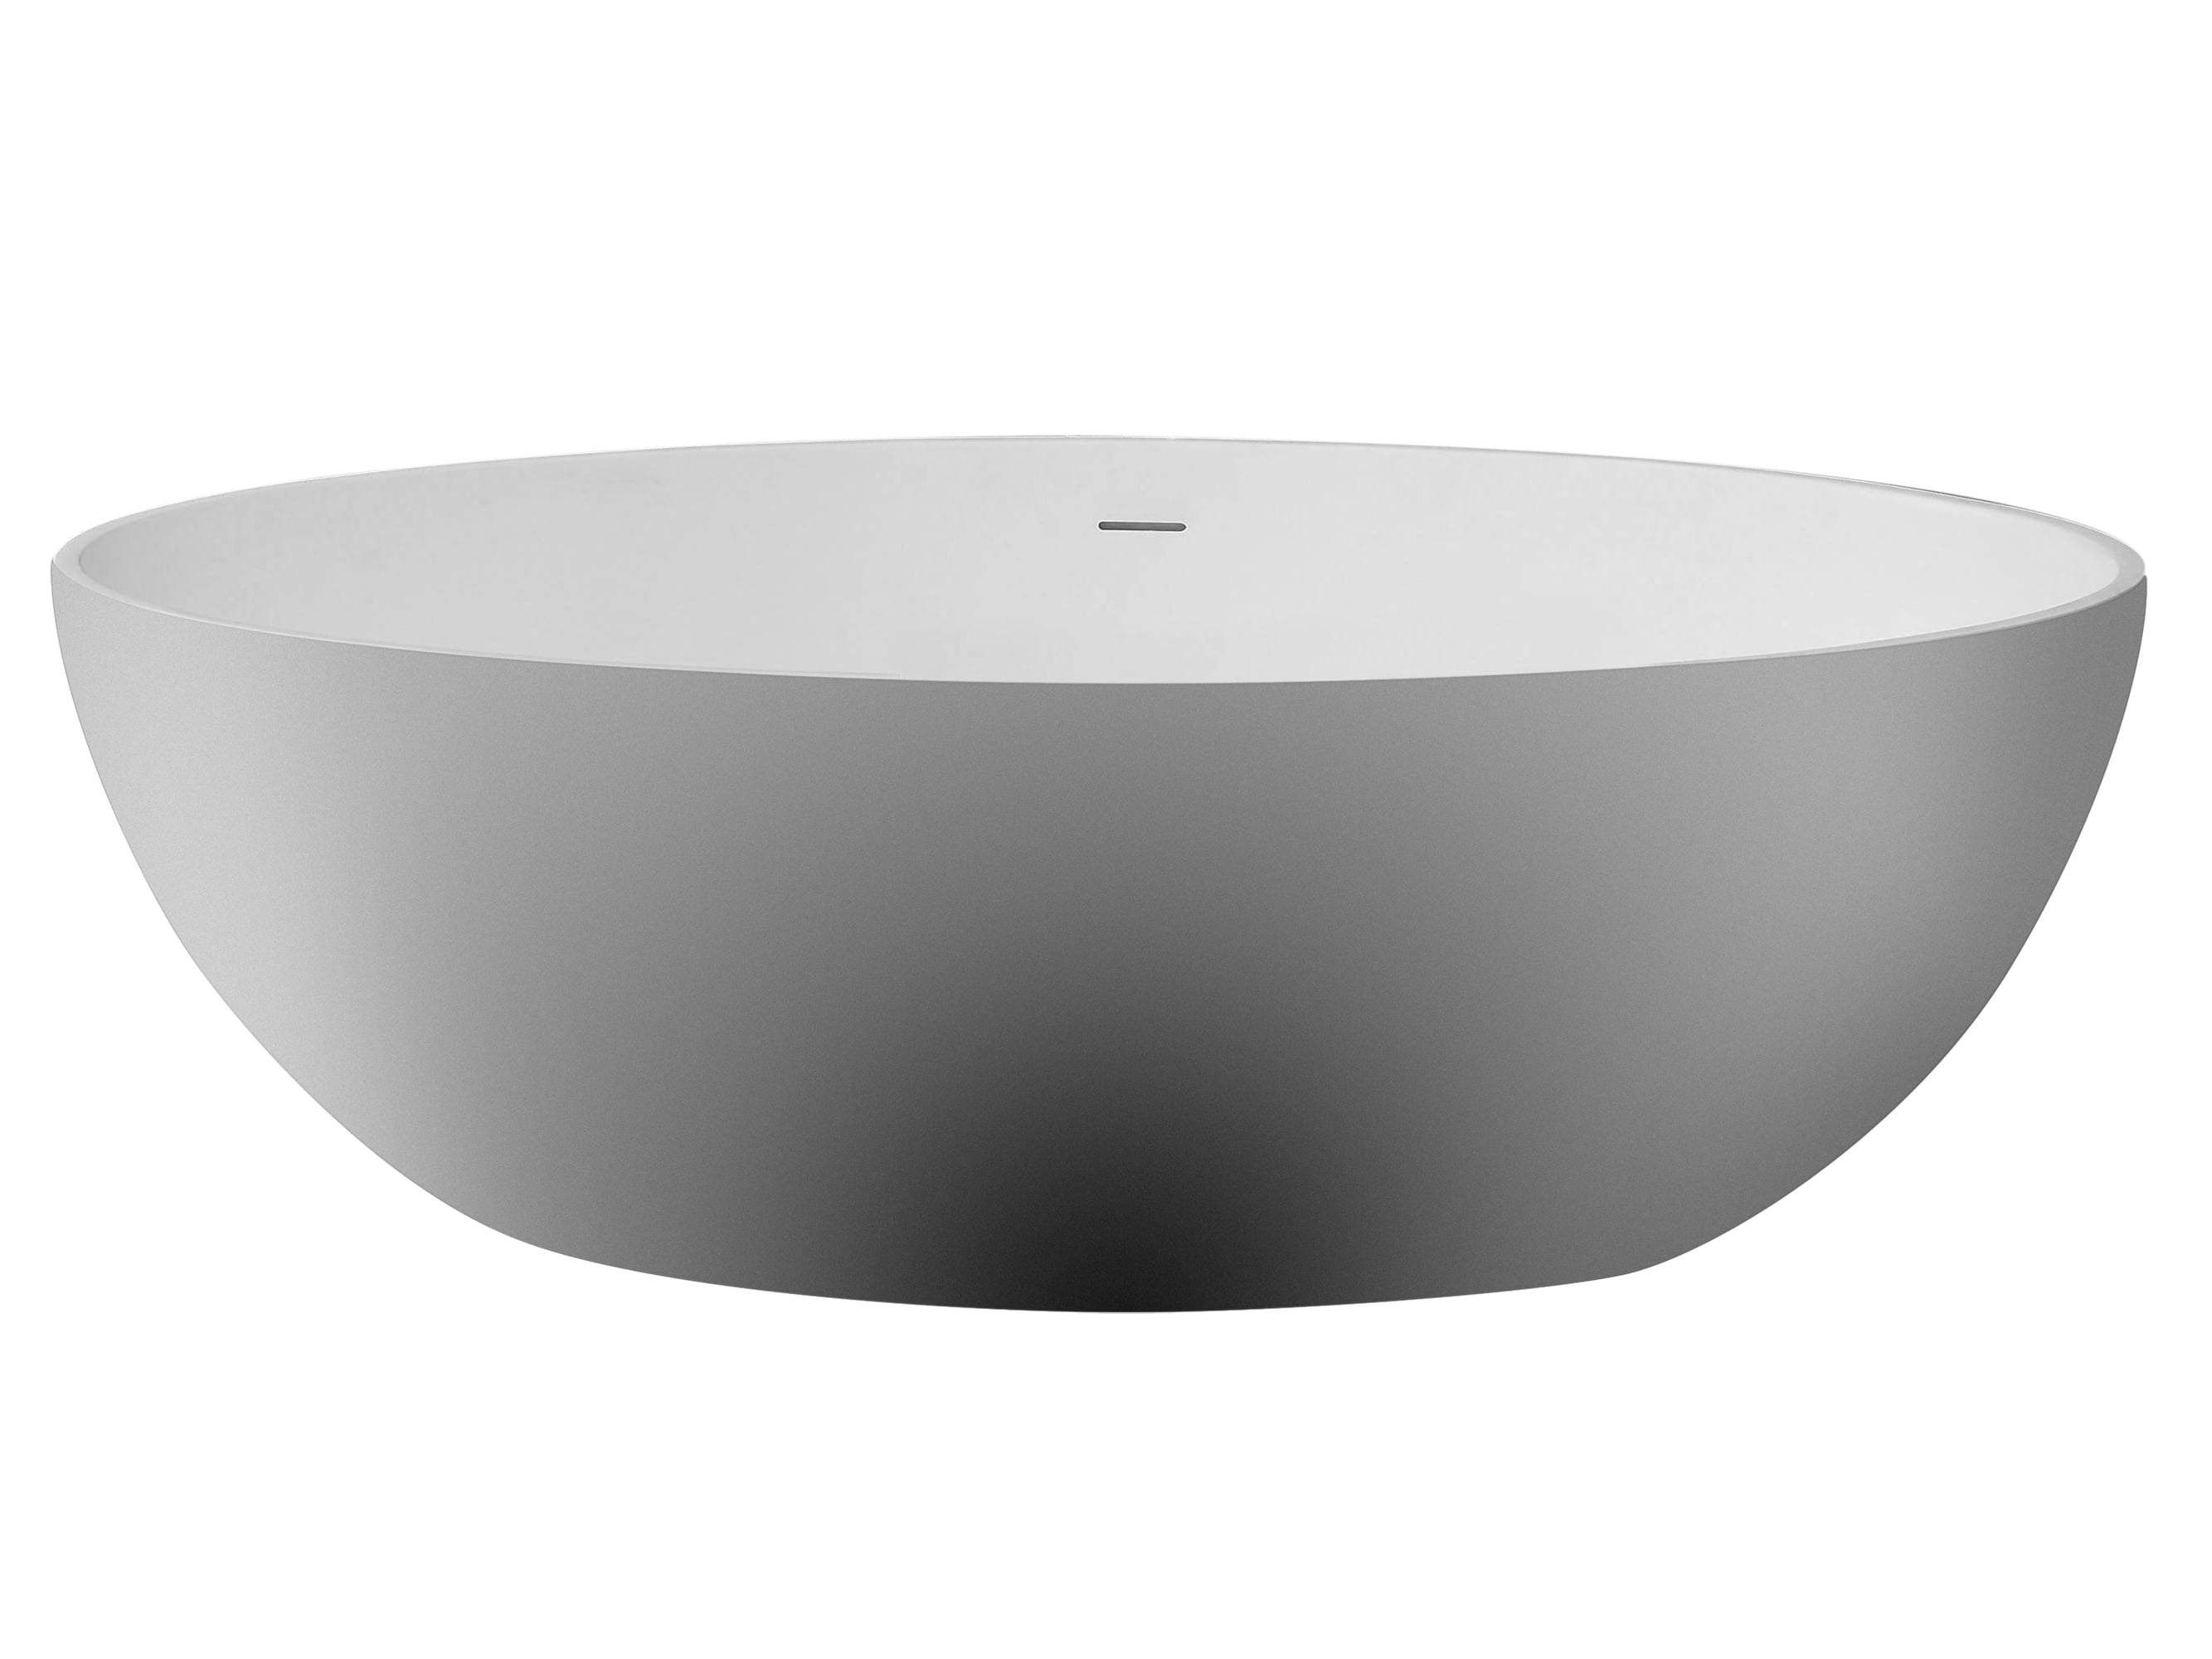 Ab9941 67 In. White Oval Solid Surface Smooth Resin Soaking Bathtub